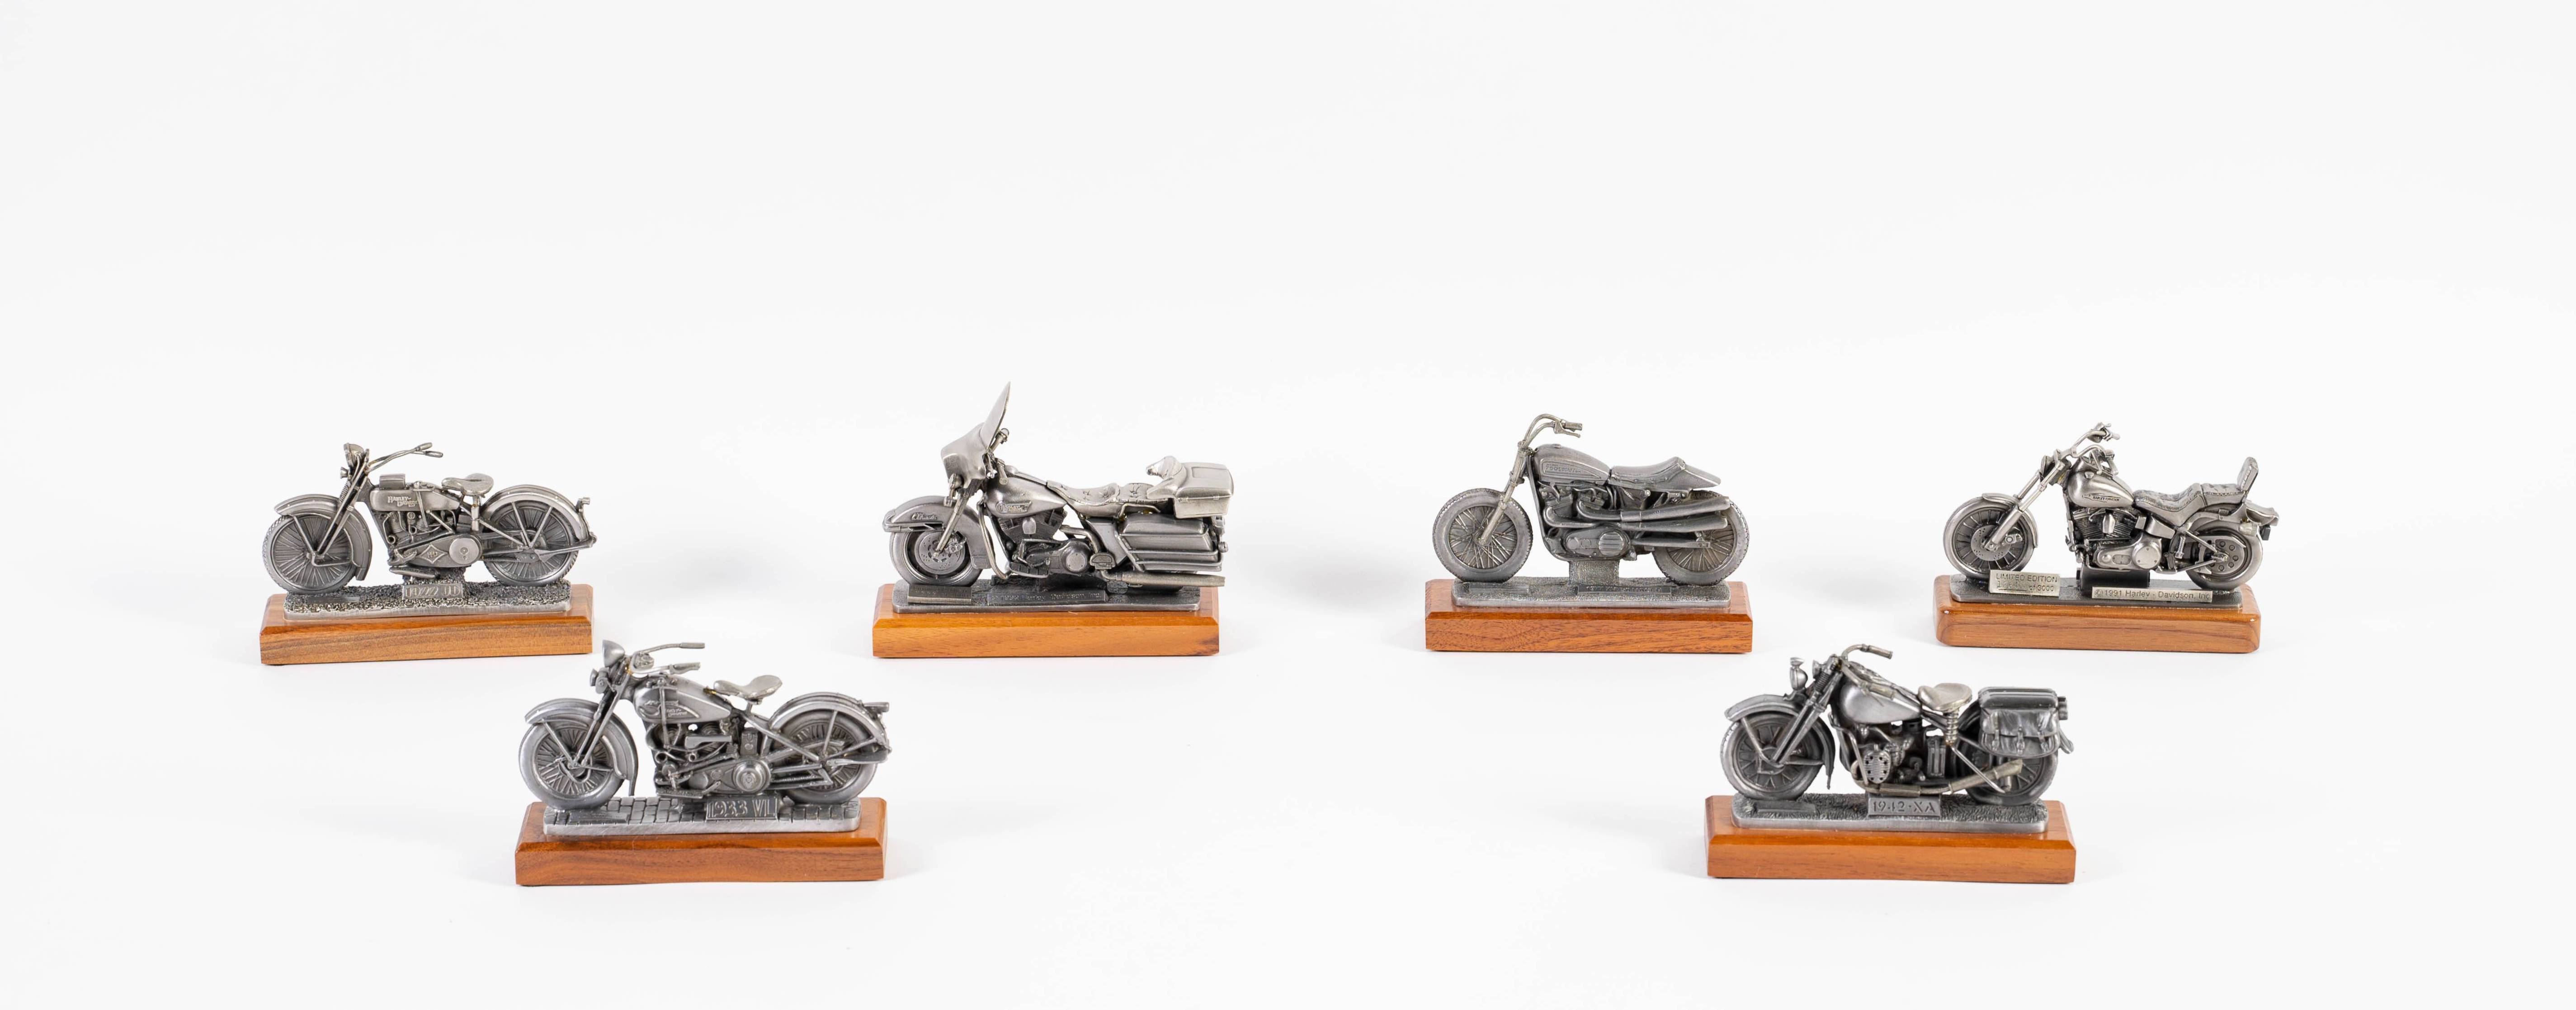 Harley-Davidson Traveling Museum Pewter Replicas with Wood Base Auction